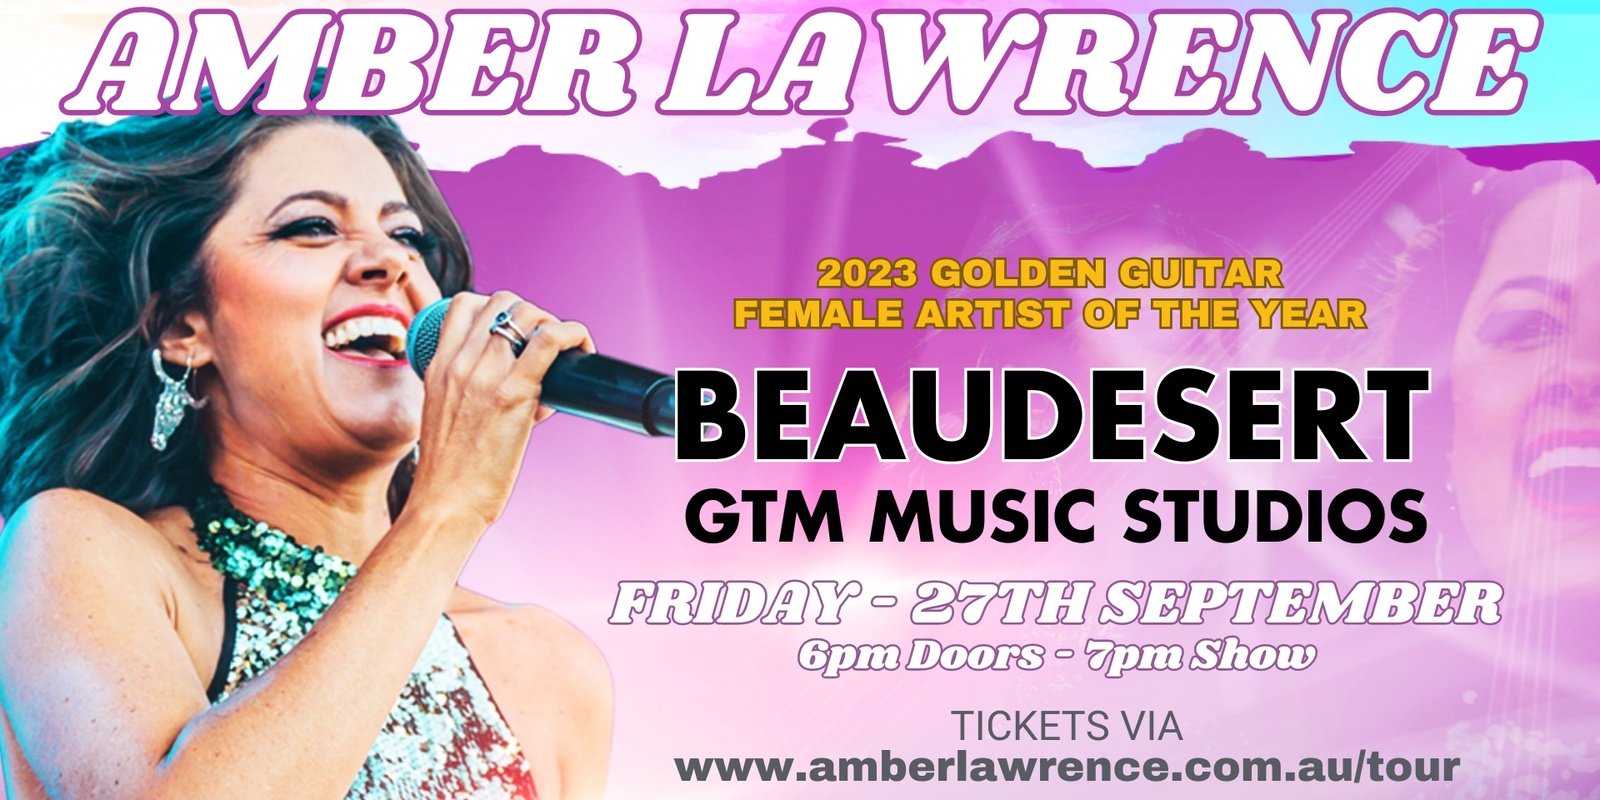 Banner image for Amber Lawrence - Beaudesert GTM Music Studios - Live A Country Song Tour